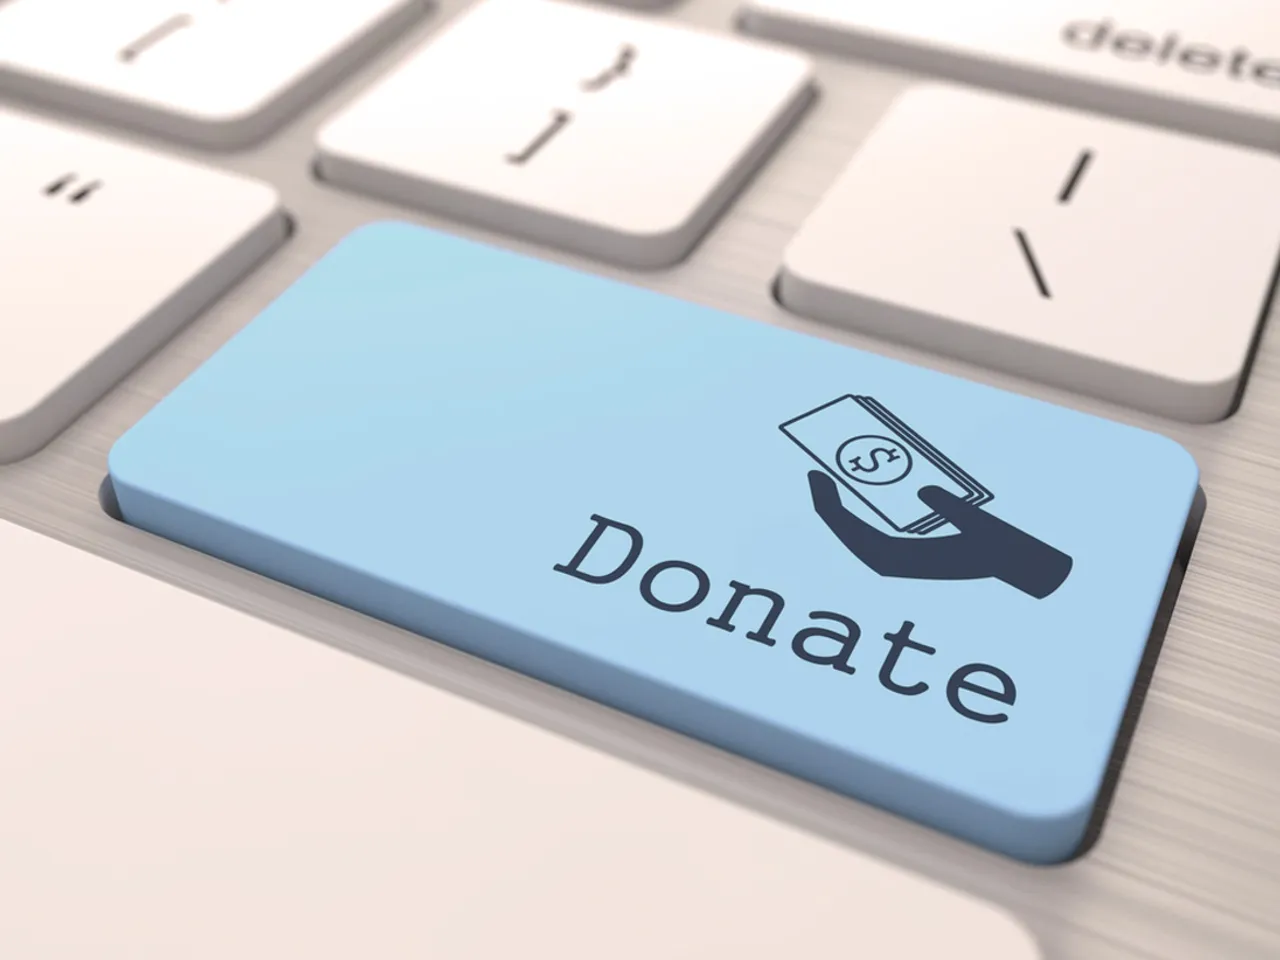 Facebook's donate button will help you become a better person